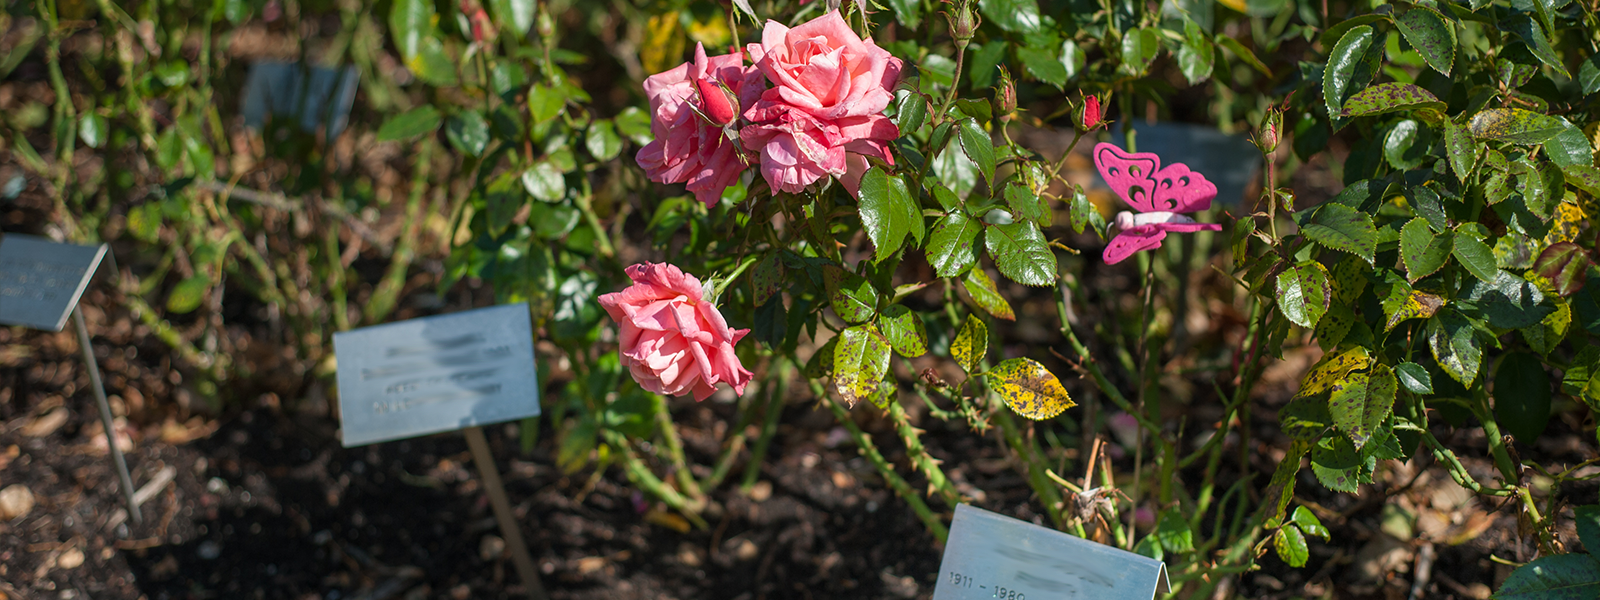 A rose plaque in our rose gardens